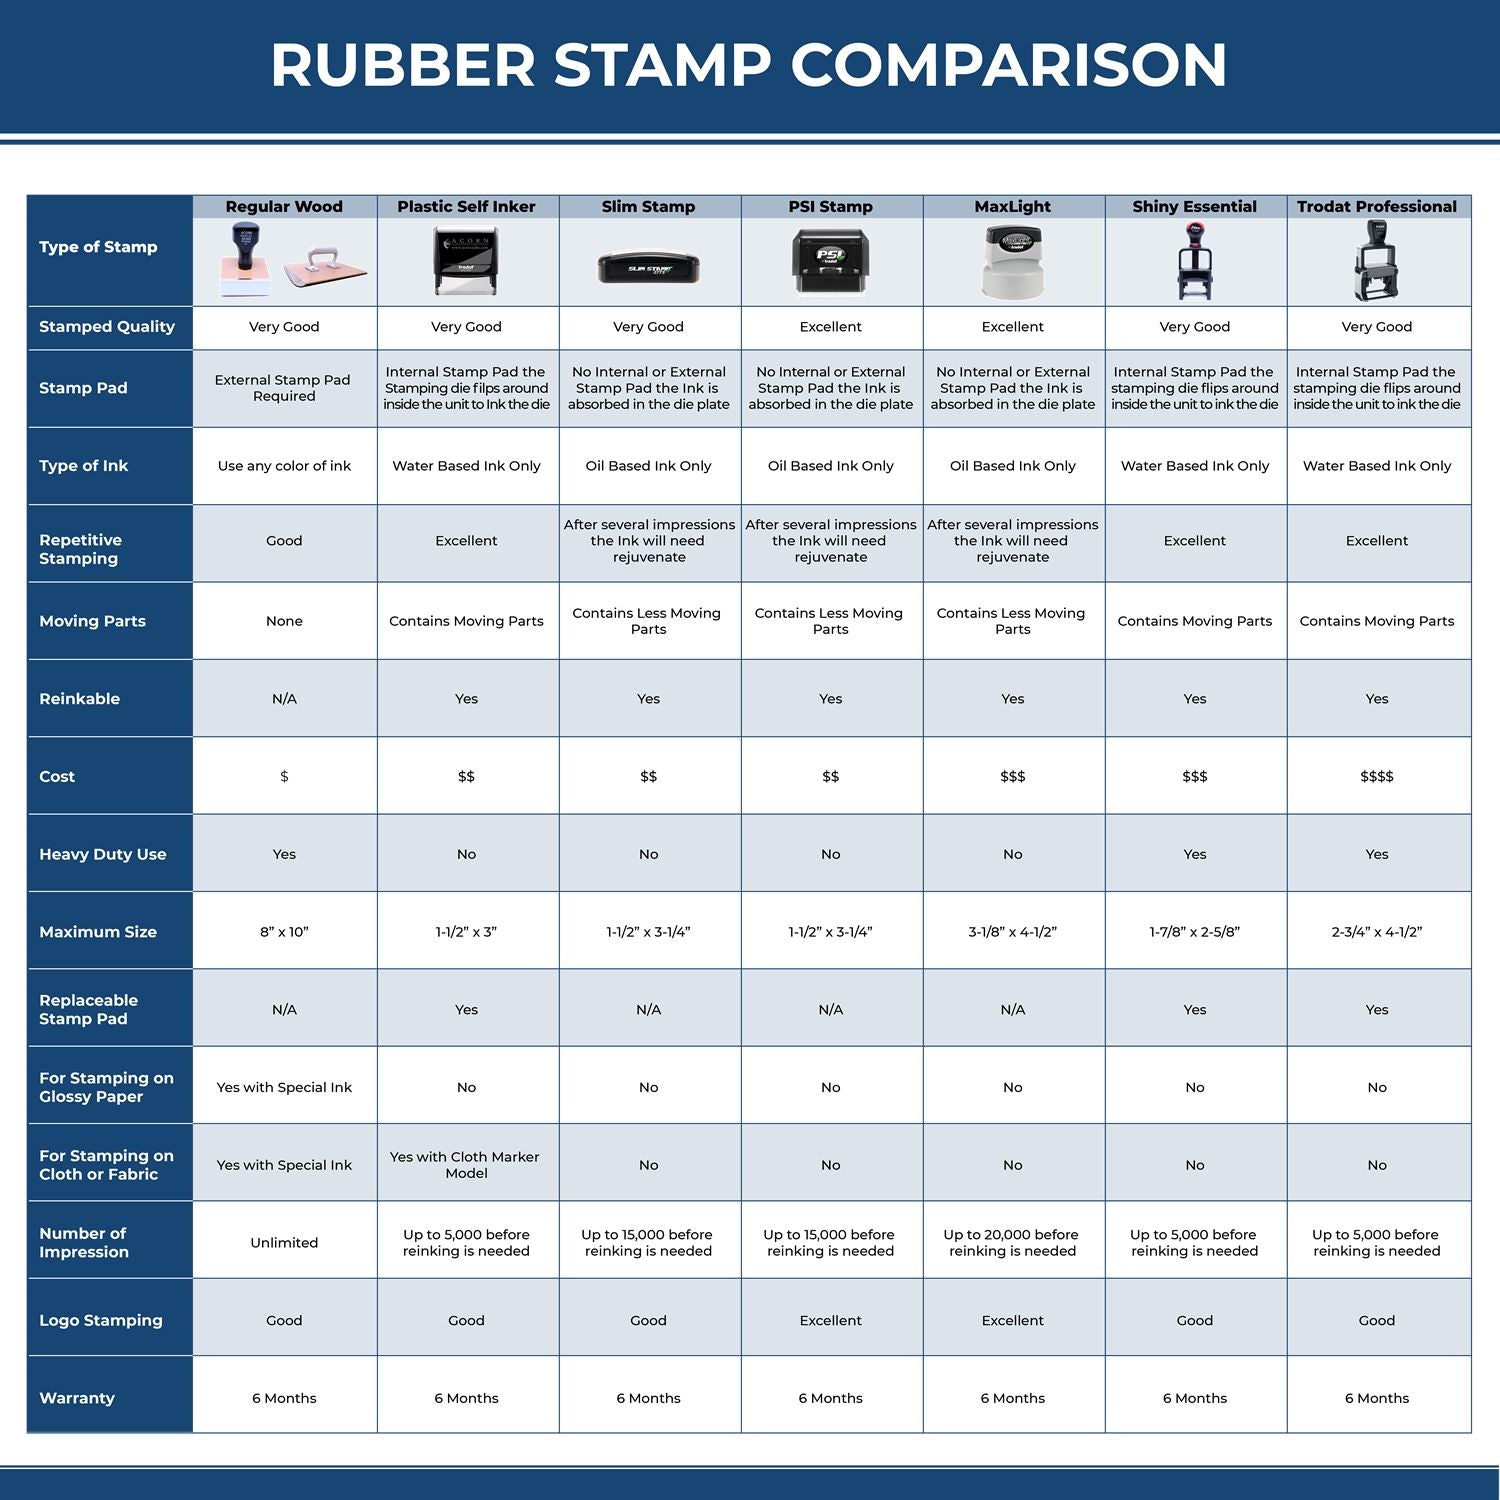 Large Self-Inking Narrow Font Confidential Stamp 4899S Rubber Stamp Comparison